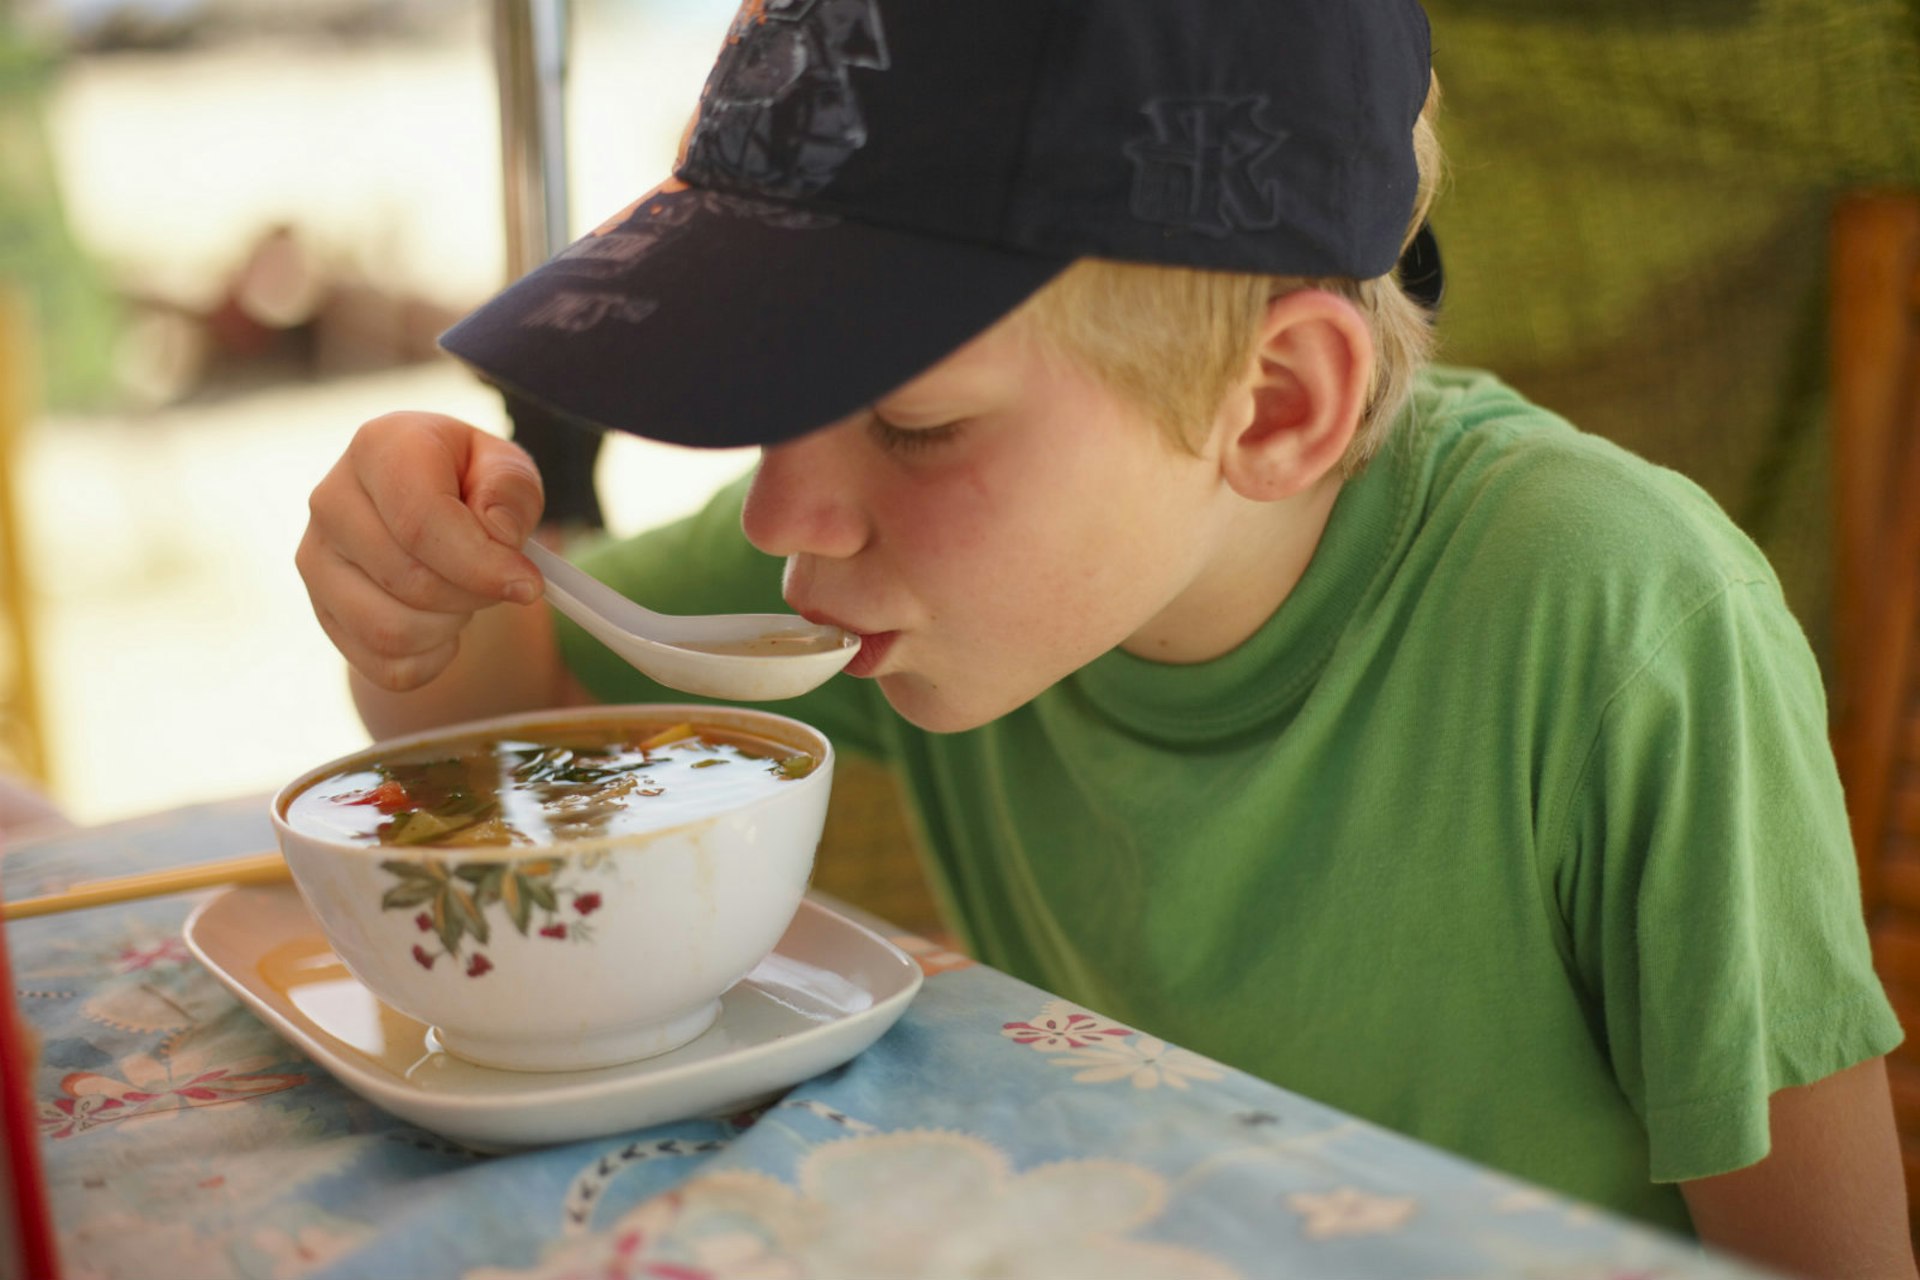 Child sips a bowl of soup © Johner Images / Getty Images